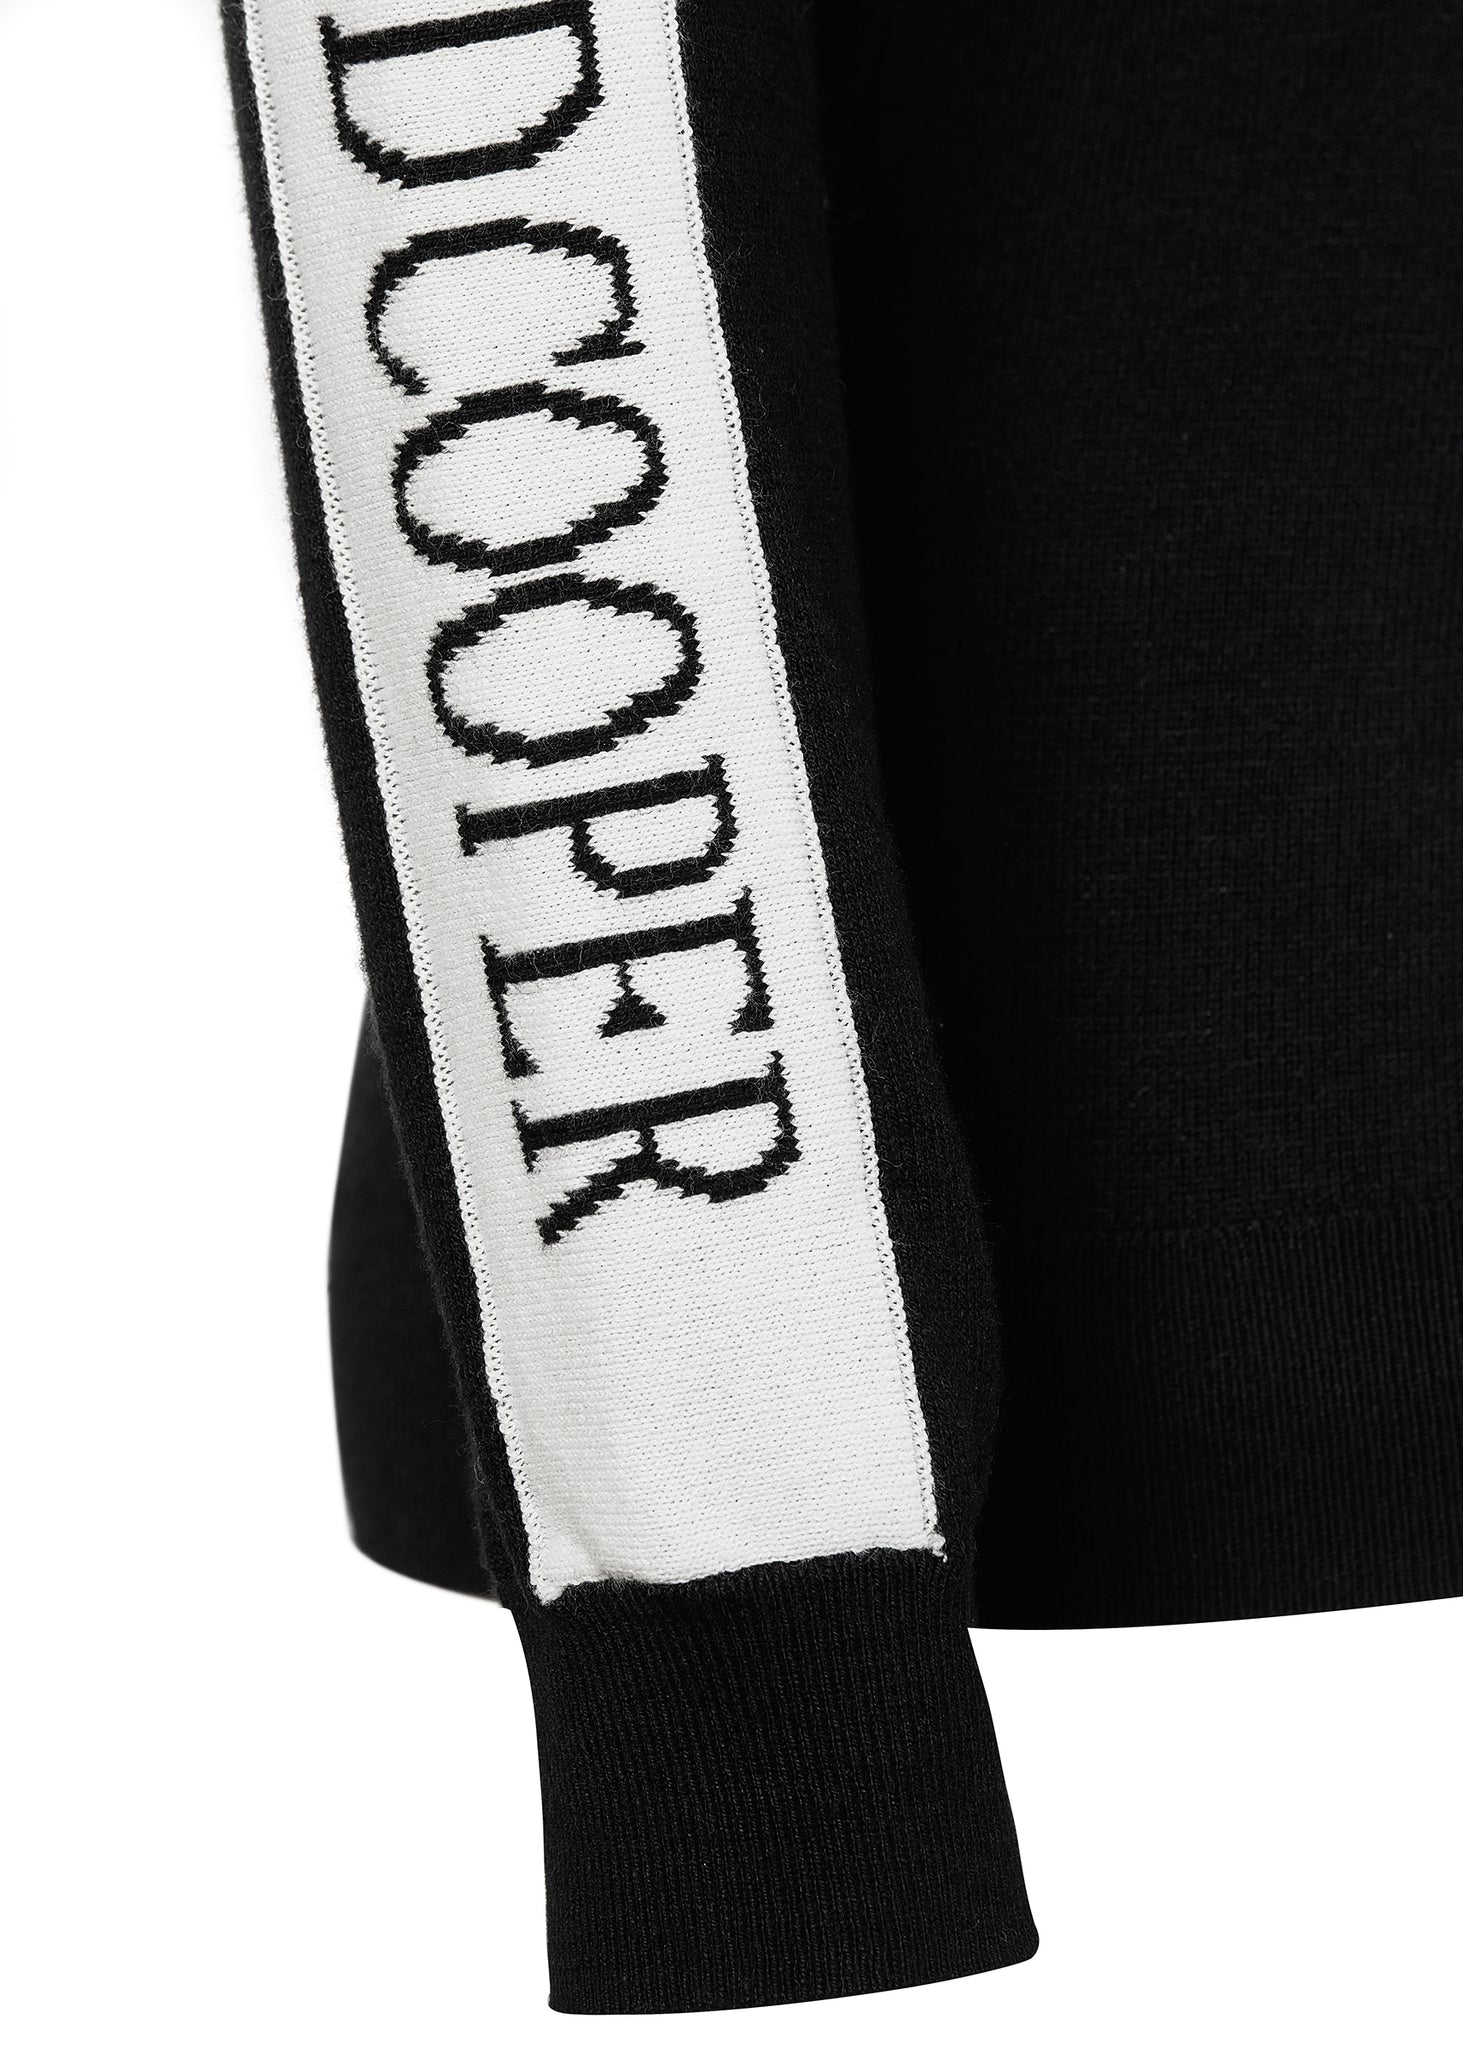 ribbed cuff detail on thermal fitted roll neck knit in black with white monogram intarsia knit panels down tops of arms